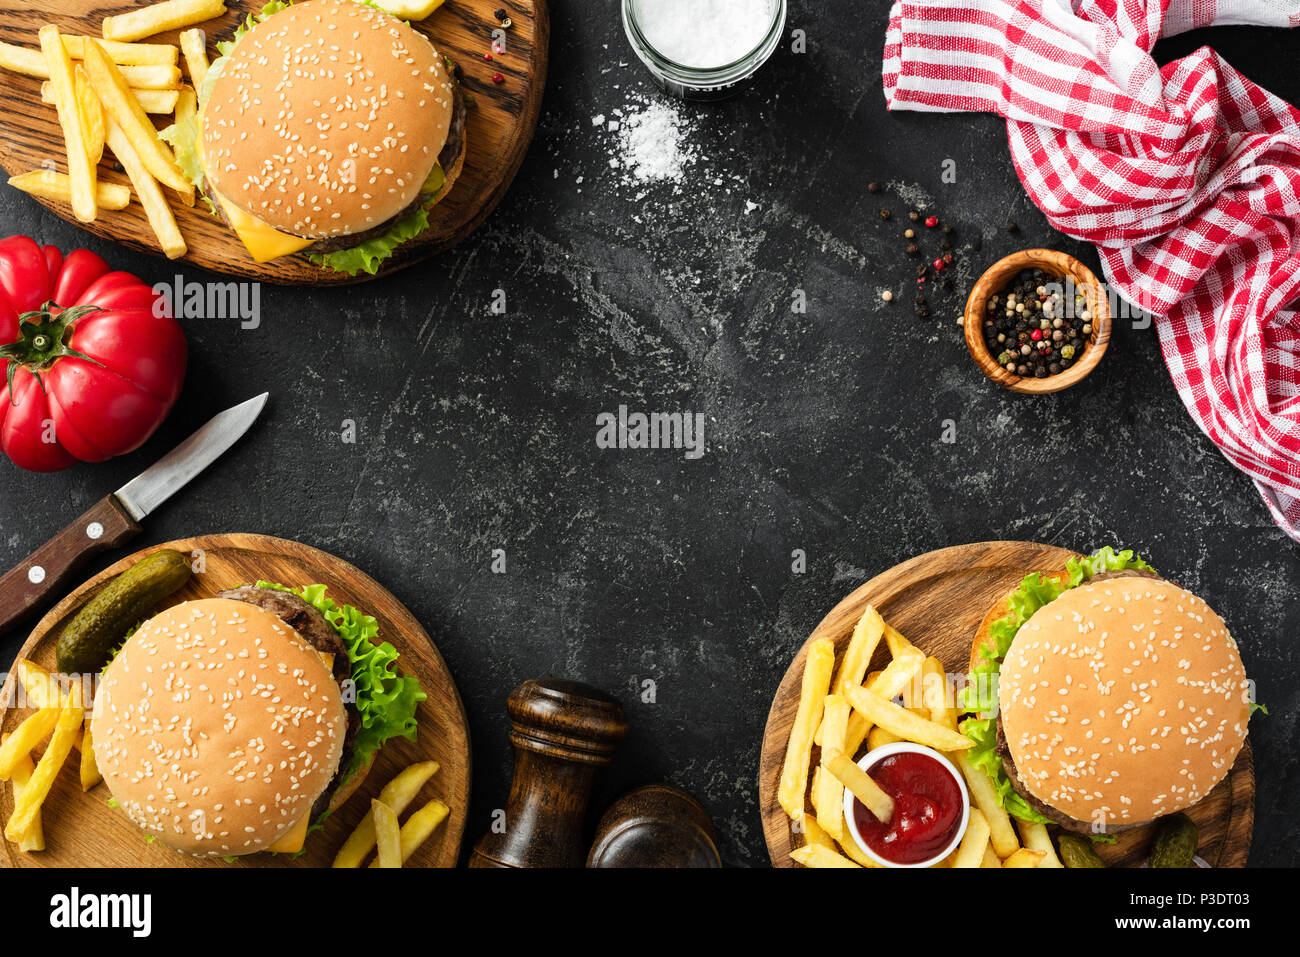 Burgers and french fries on dark stone background, top view with copy space. Homemade hamburgers and fries. Fast food or BBQ concept Stock Photo